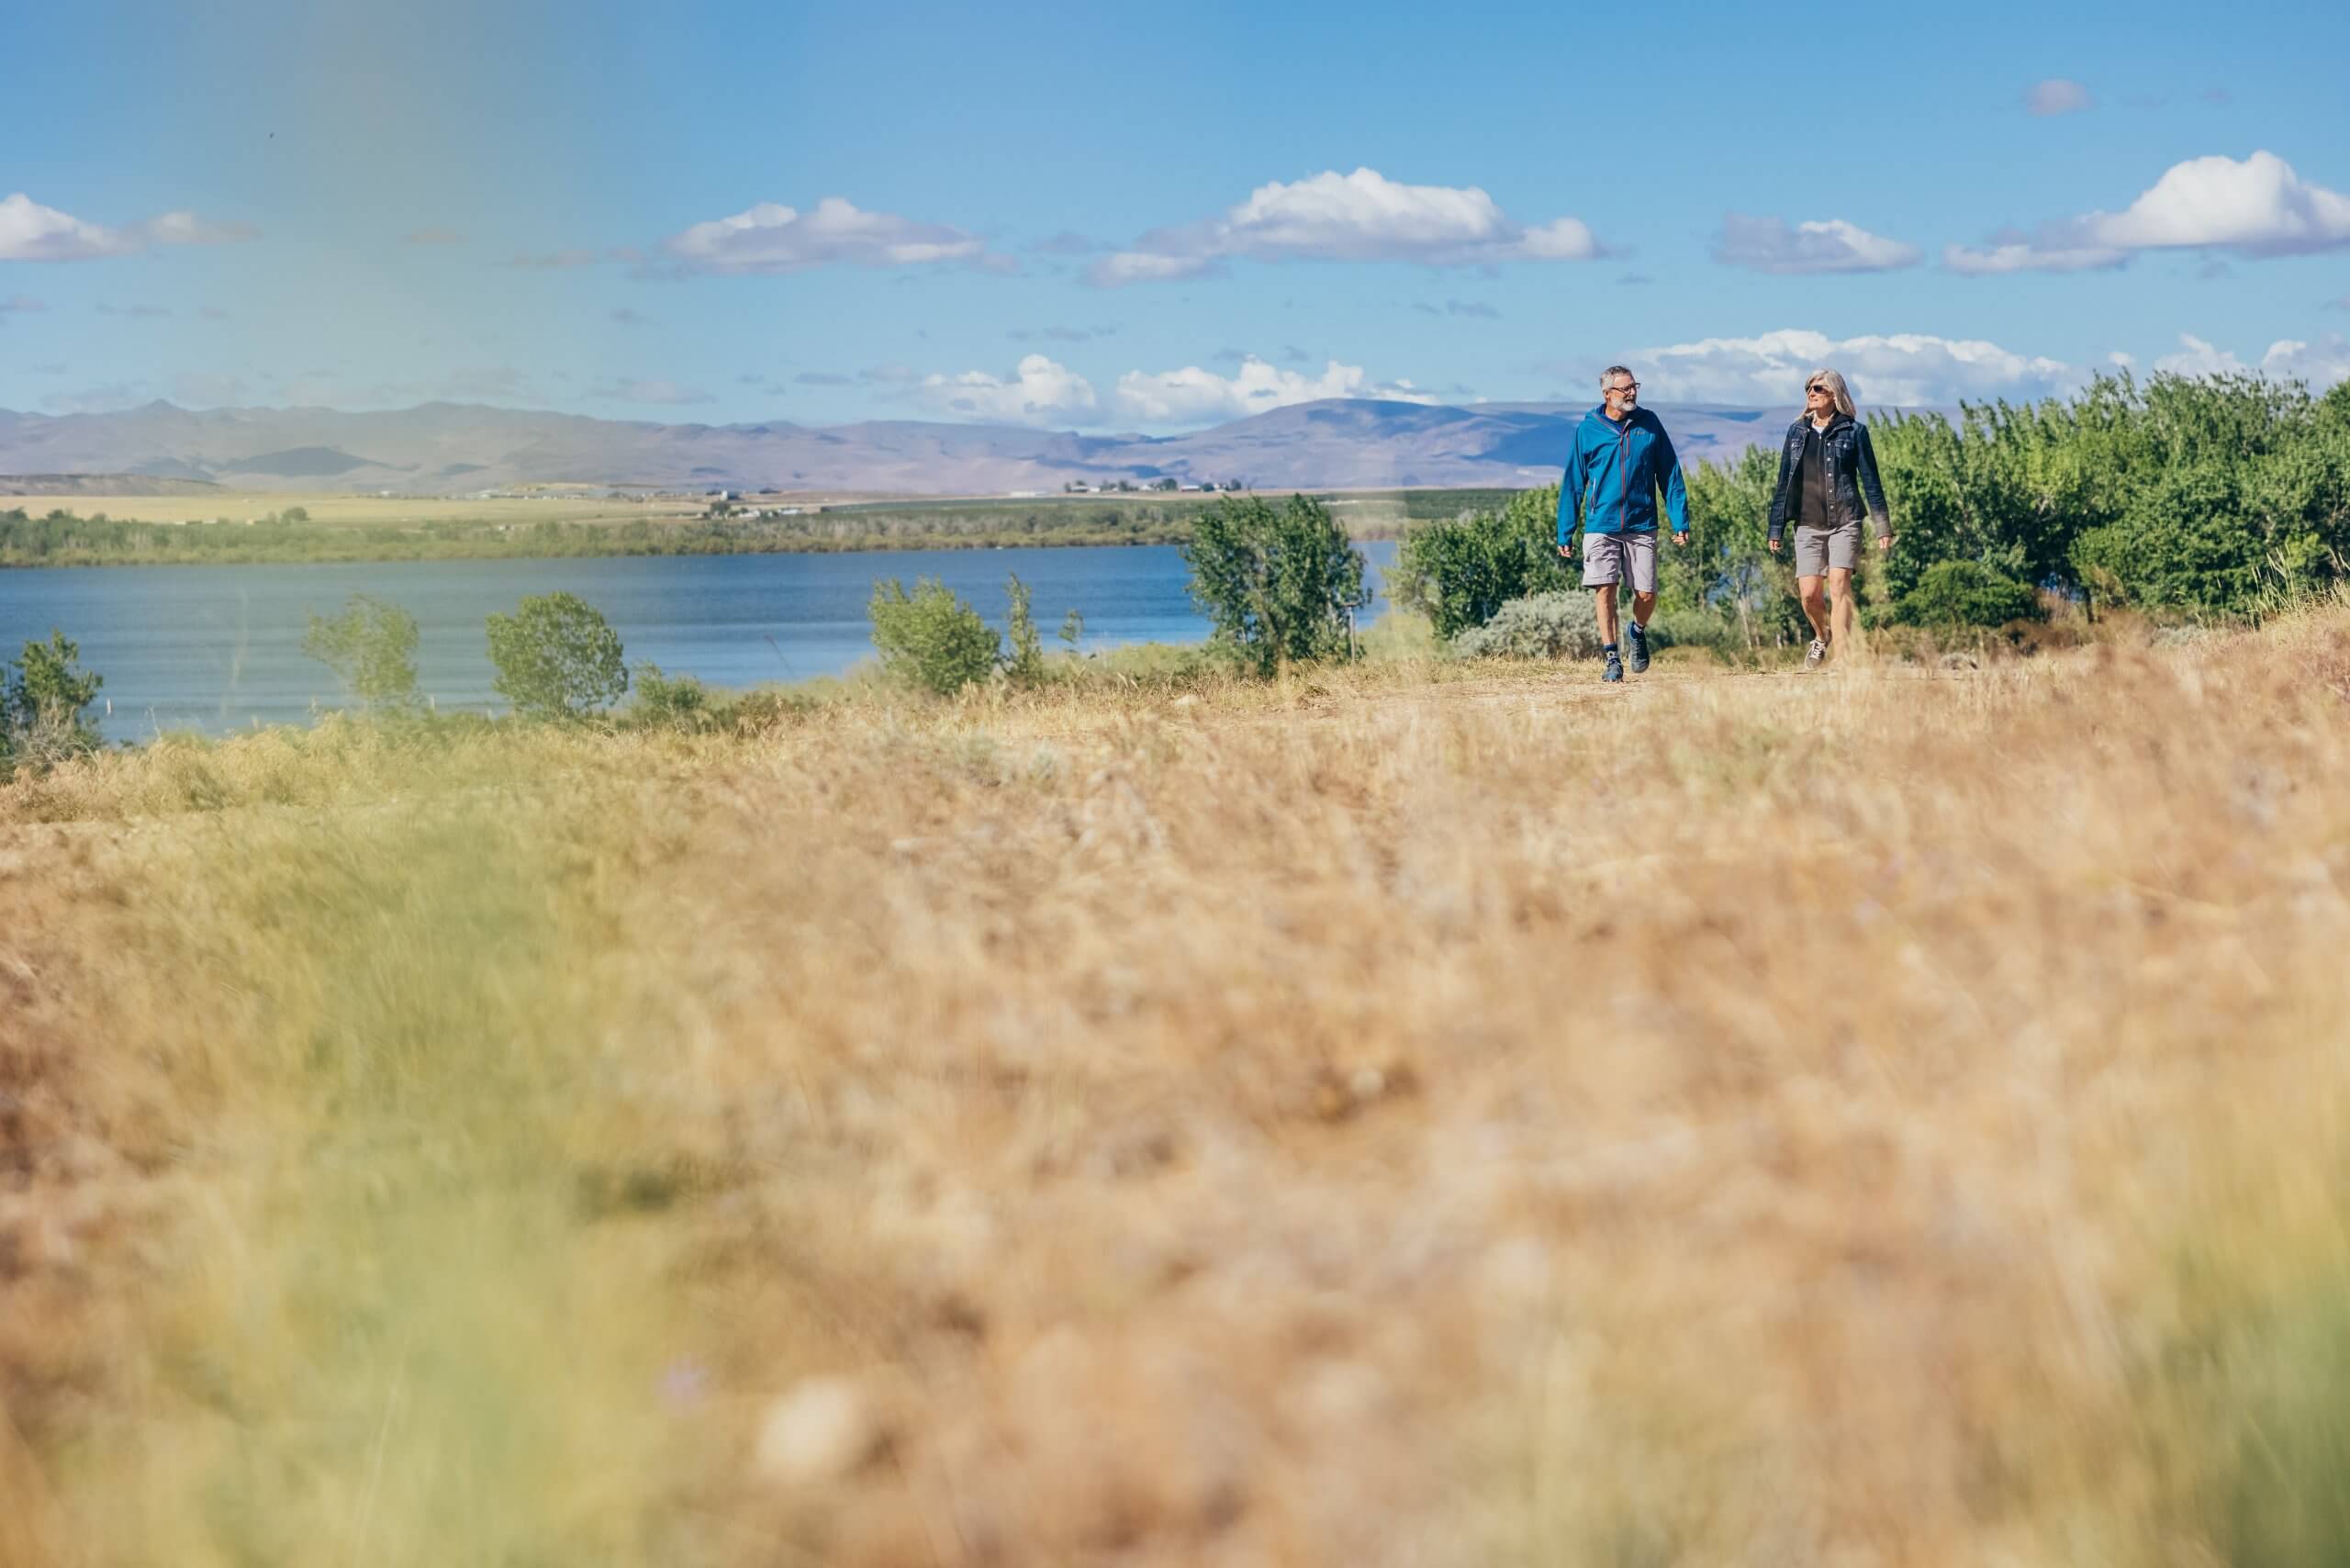 two people walking at a wildlife refuge beside a lake with mountains in the distance